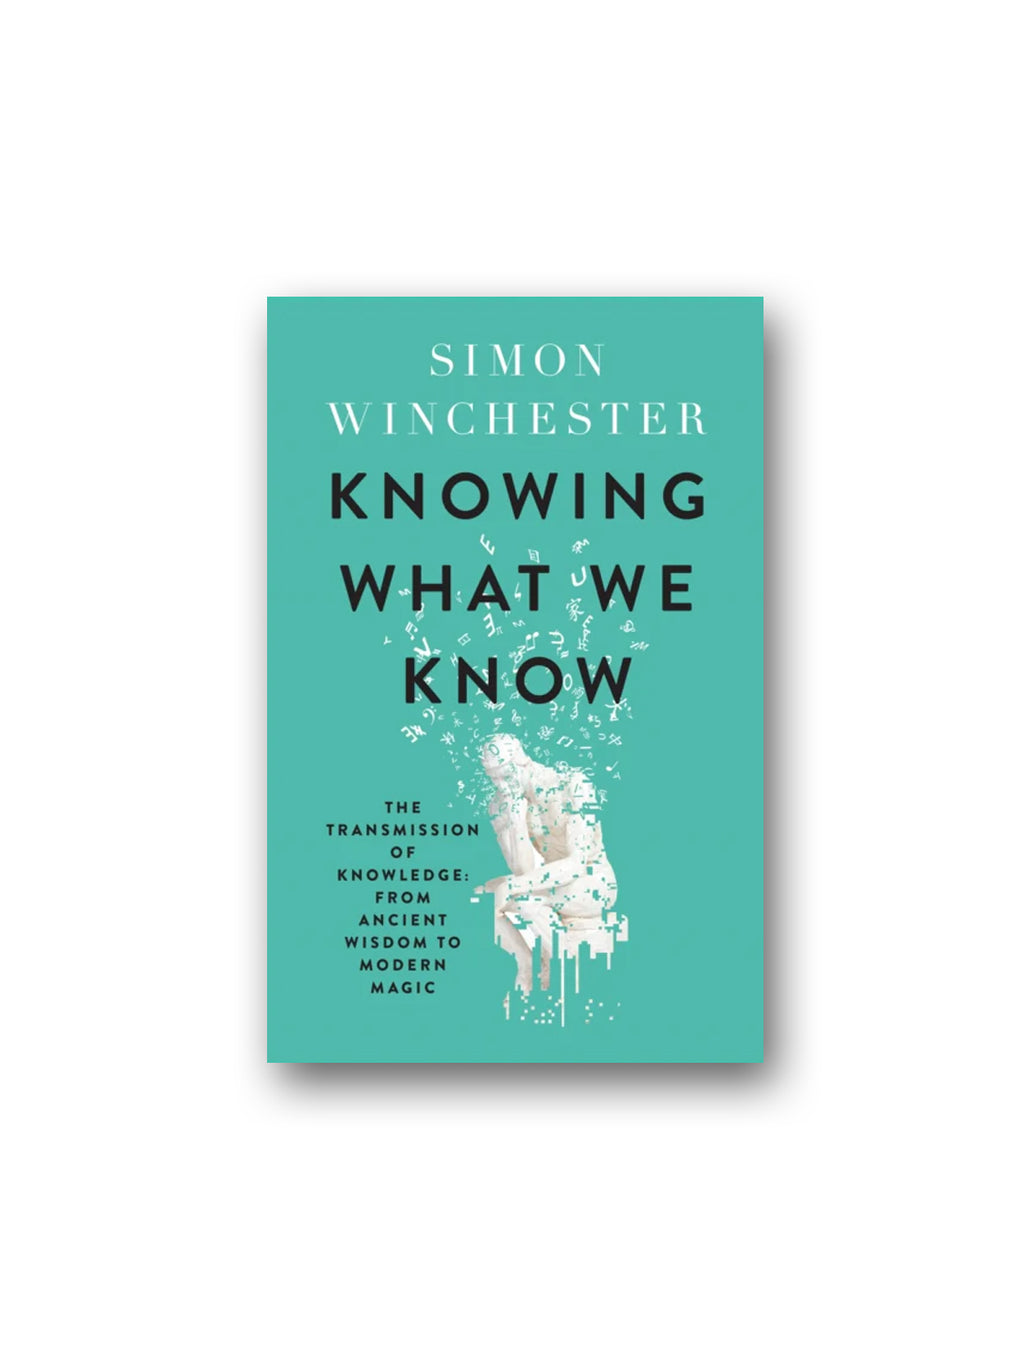 Knowing What We Know